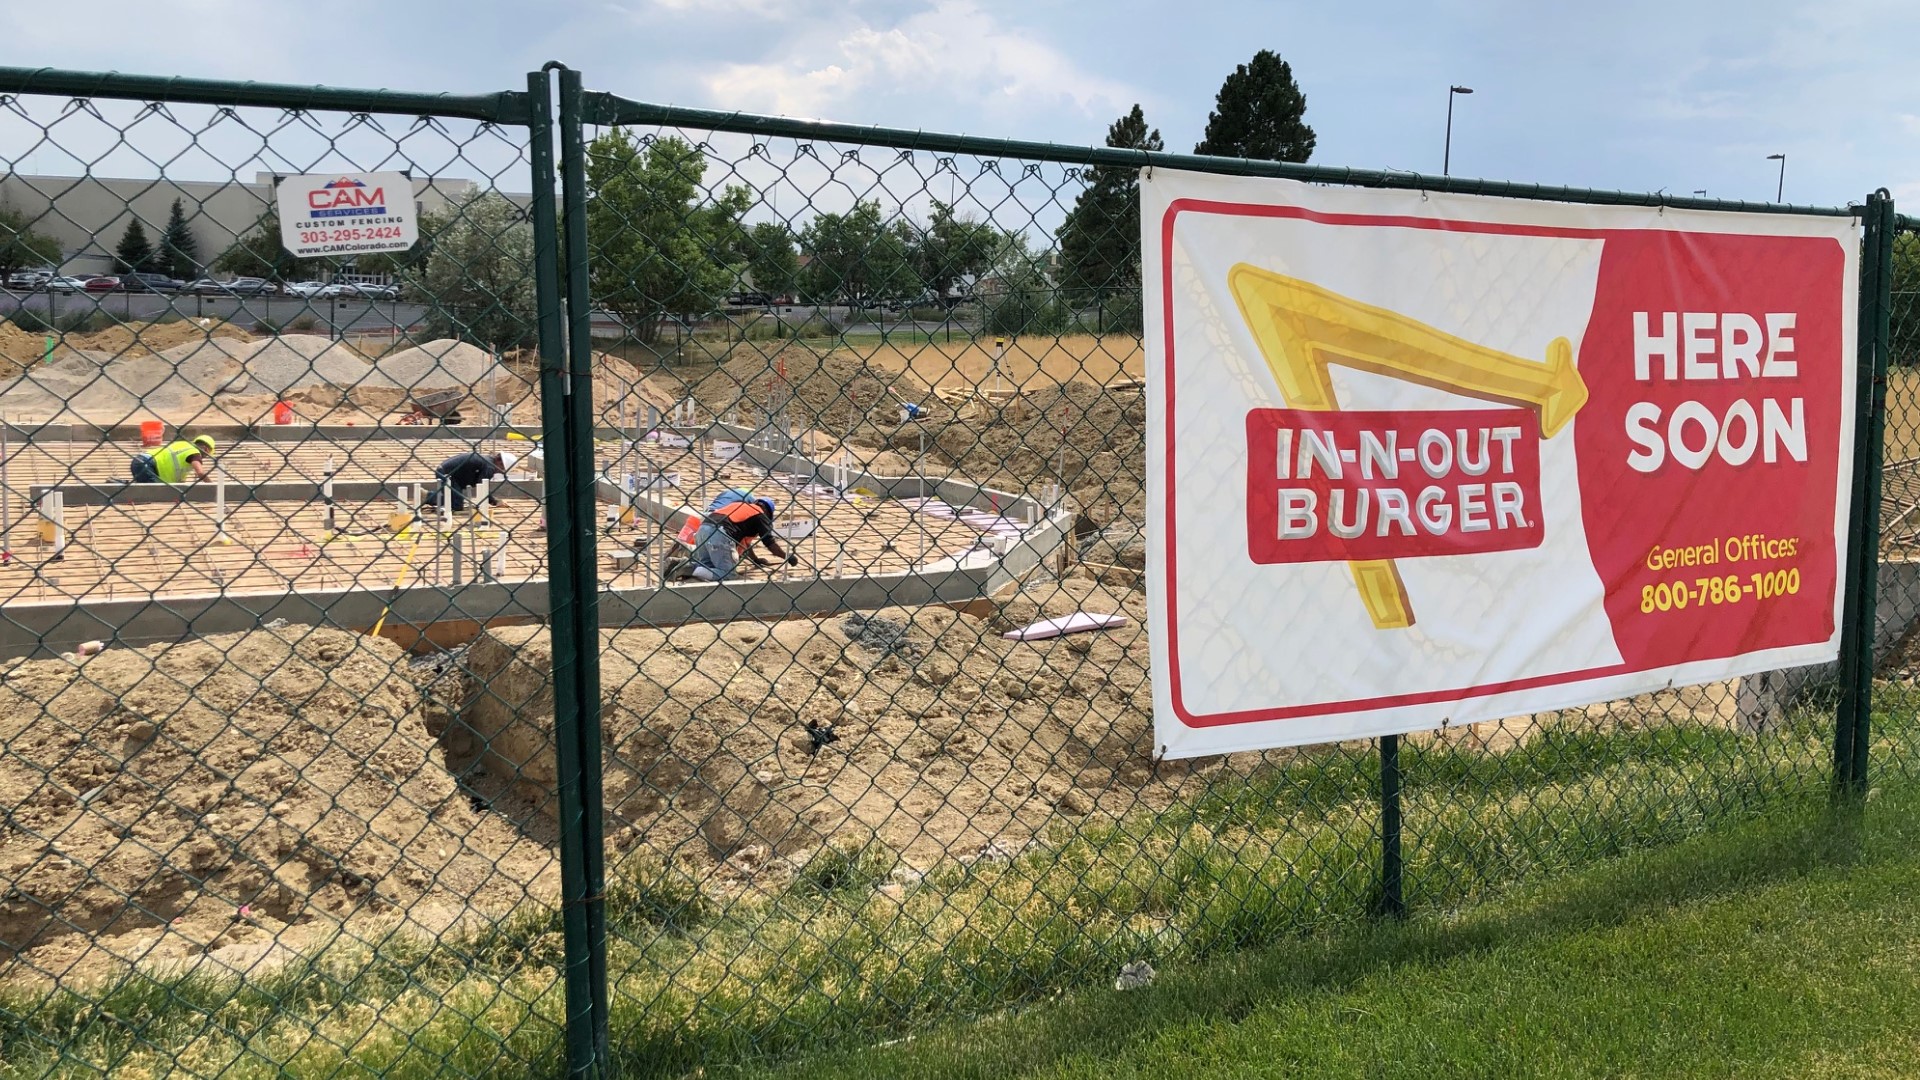 Three In-N-Out Burger locations are under construction in Colorado and on schedule to open by the end of 2020.